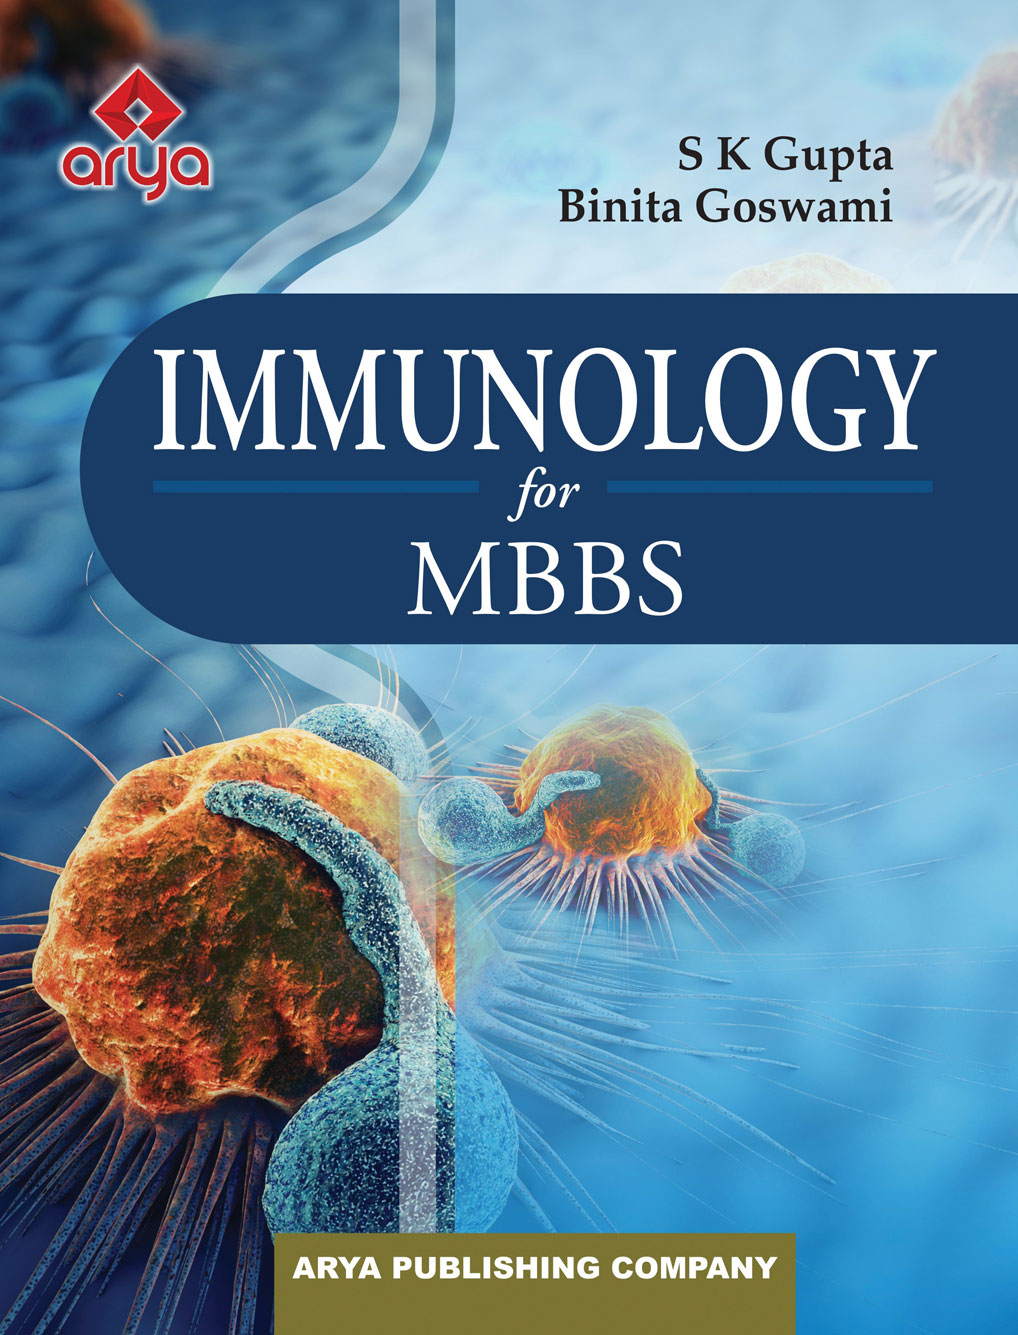 Immunology for MBBS